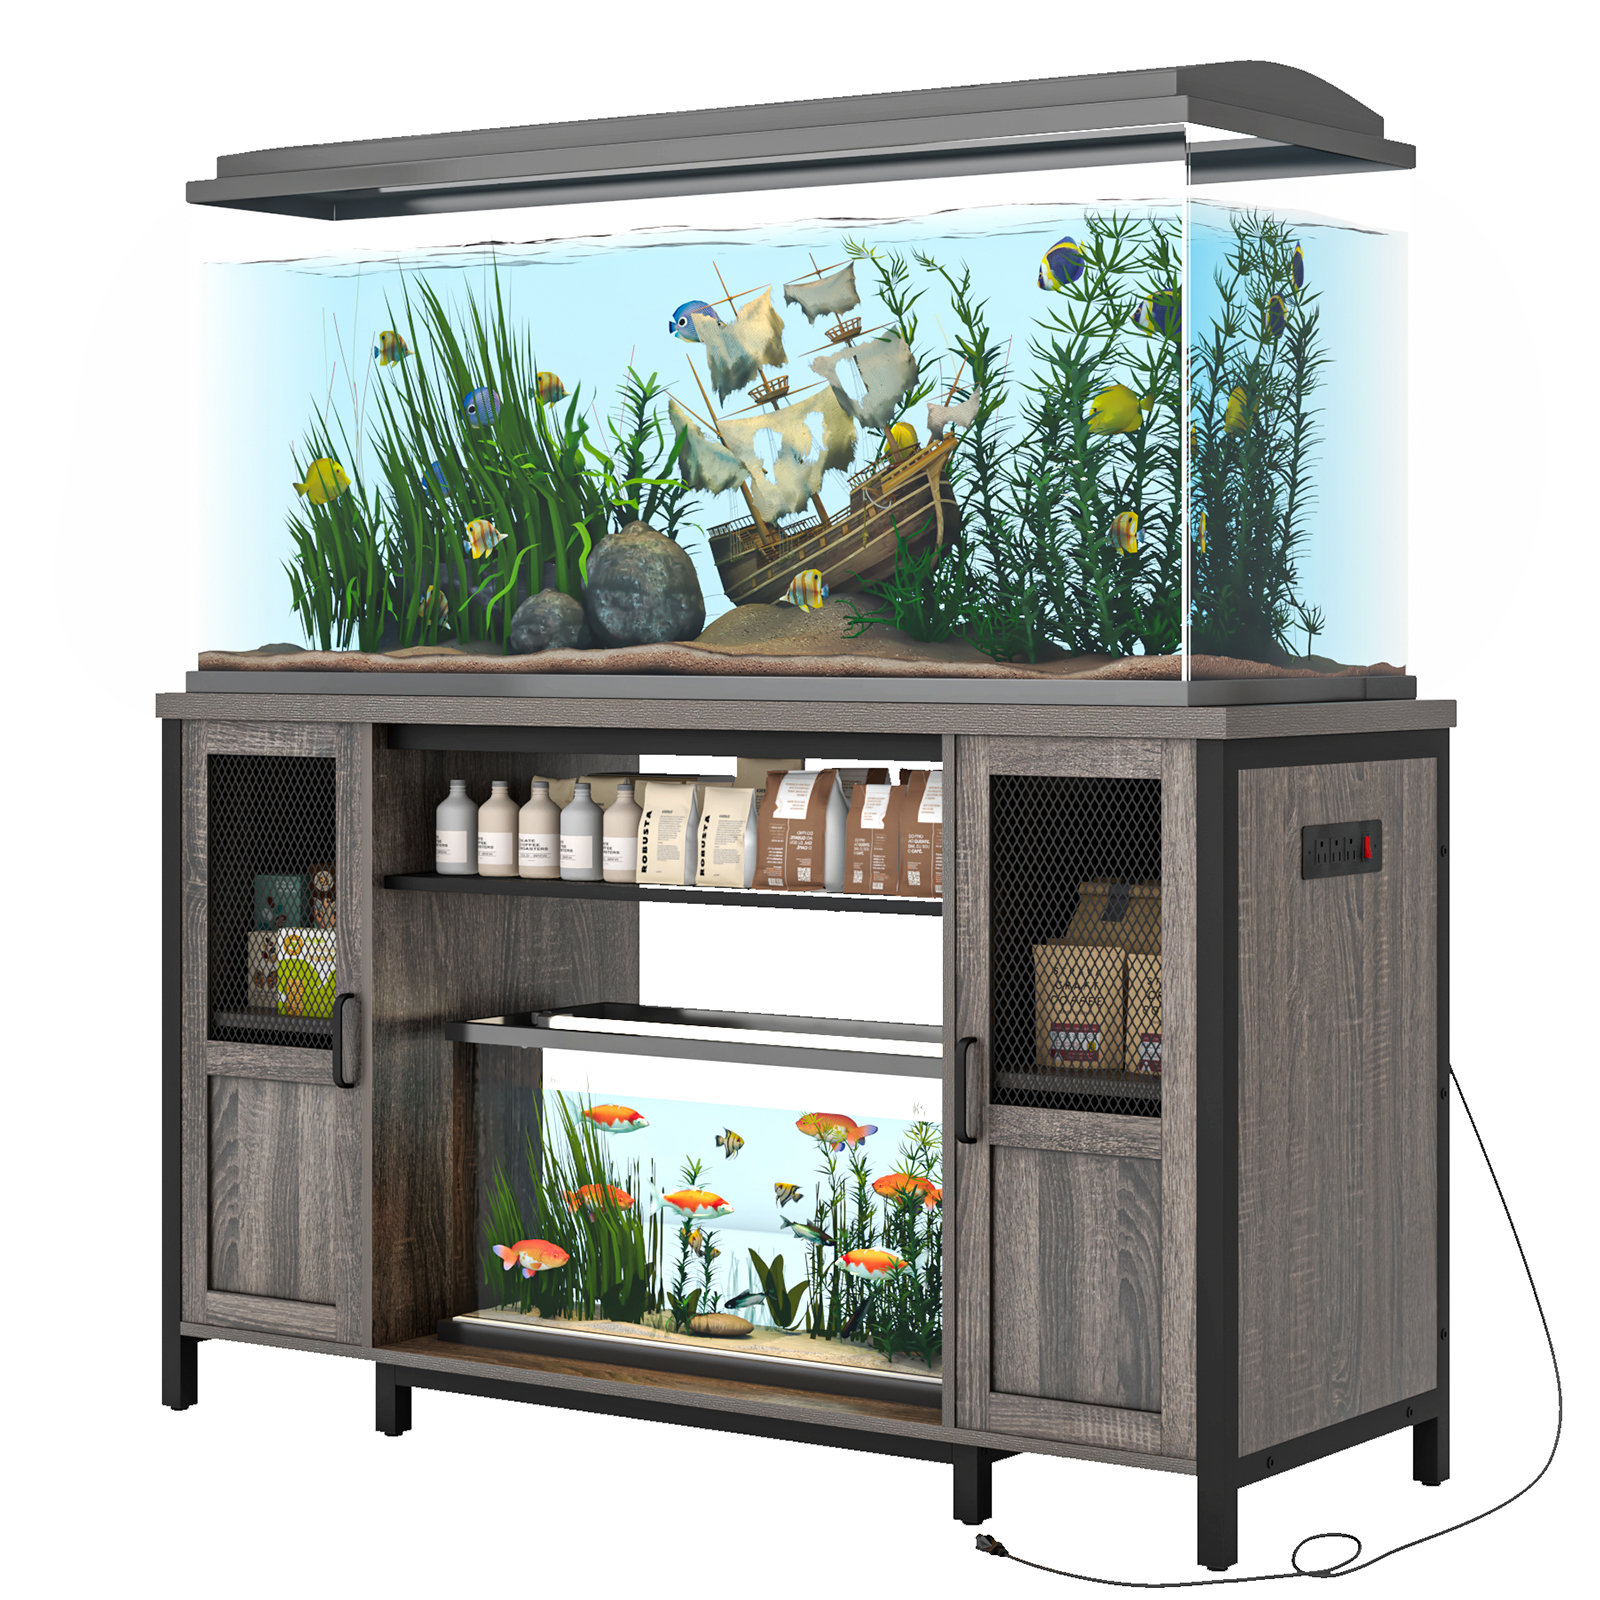 55-75 Gallon Fish Tank Stand With Power Outlet, Heavy Duty Metal Aquarium  Stand For 2 Fish Tank Accessories Storage, Suit For Turtle Tank, Reptile